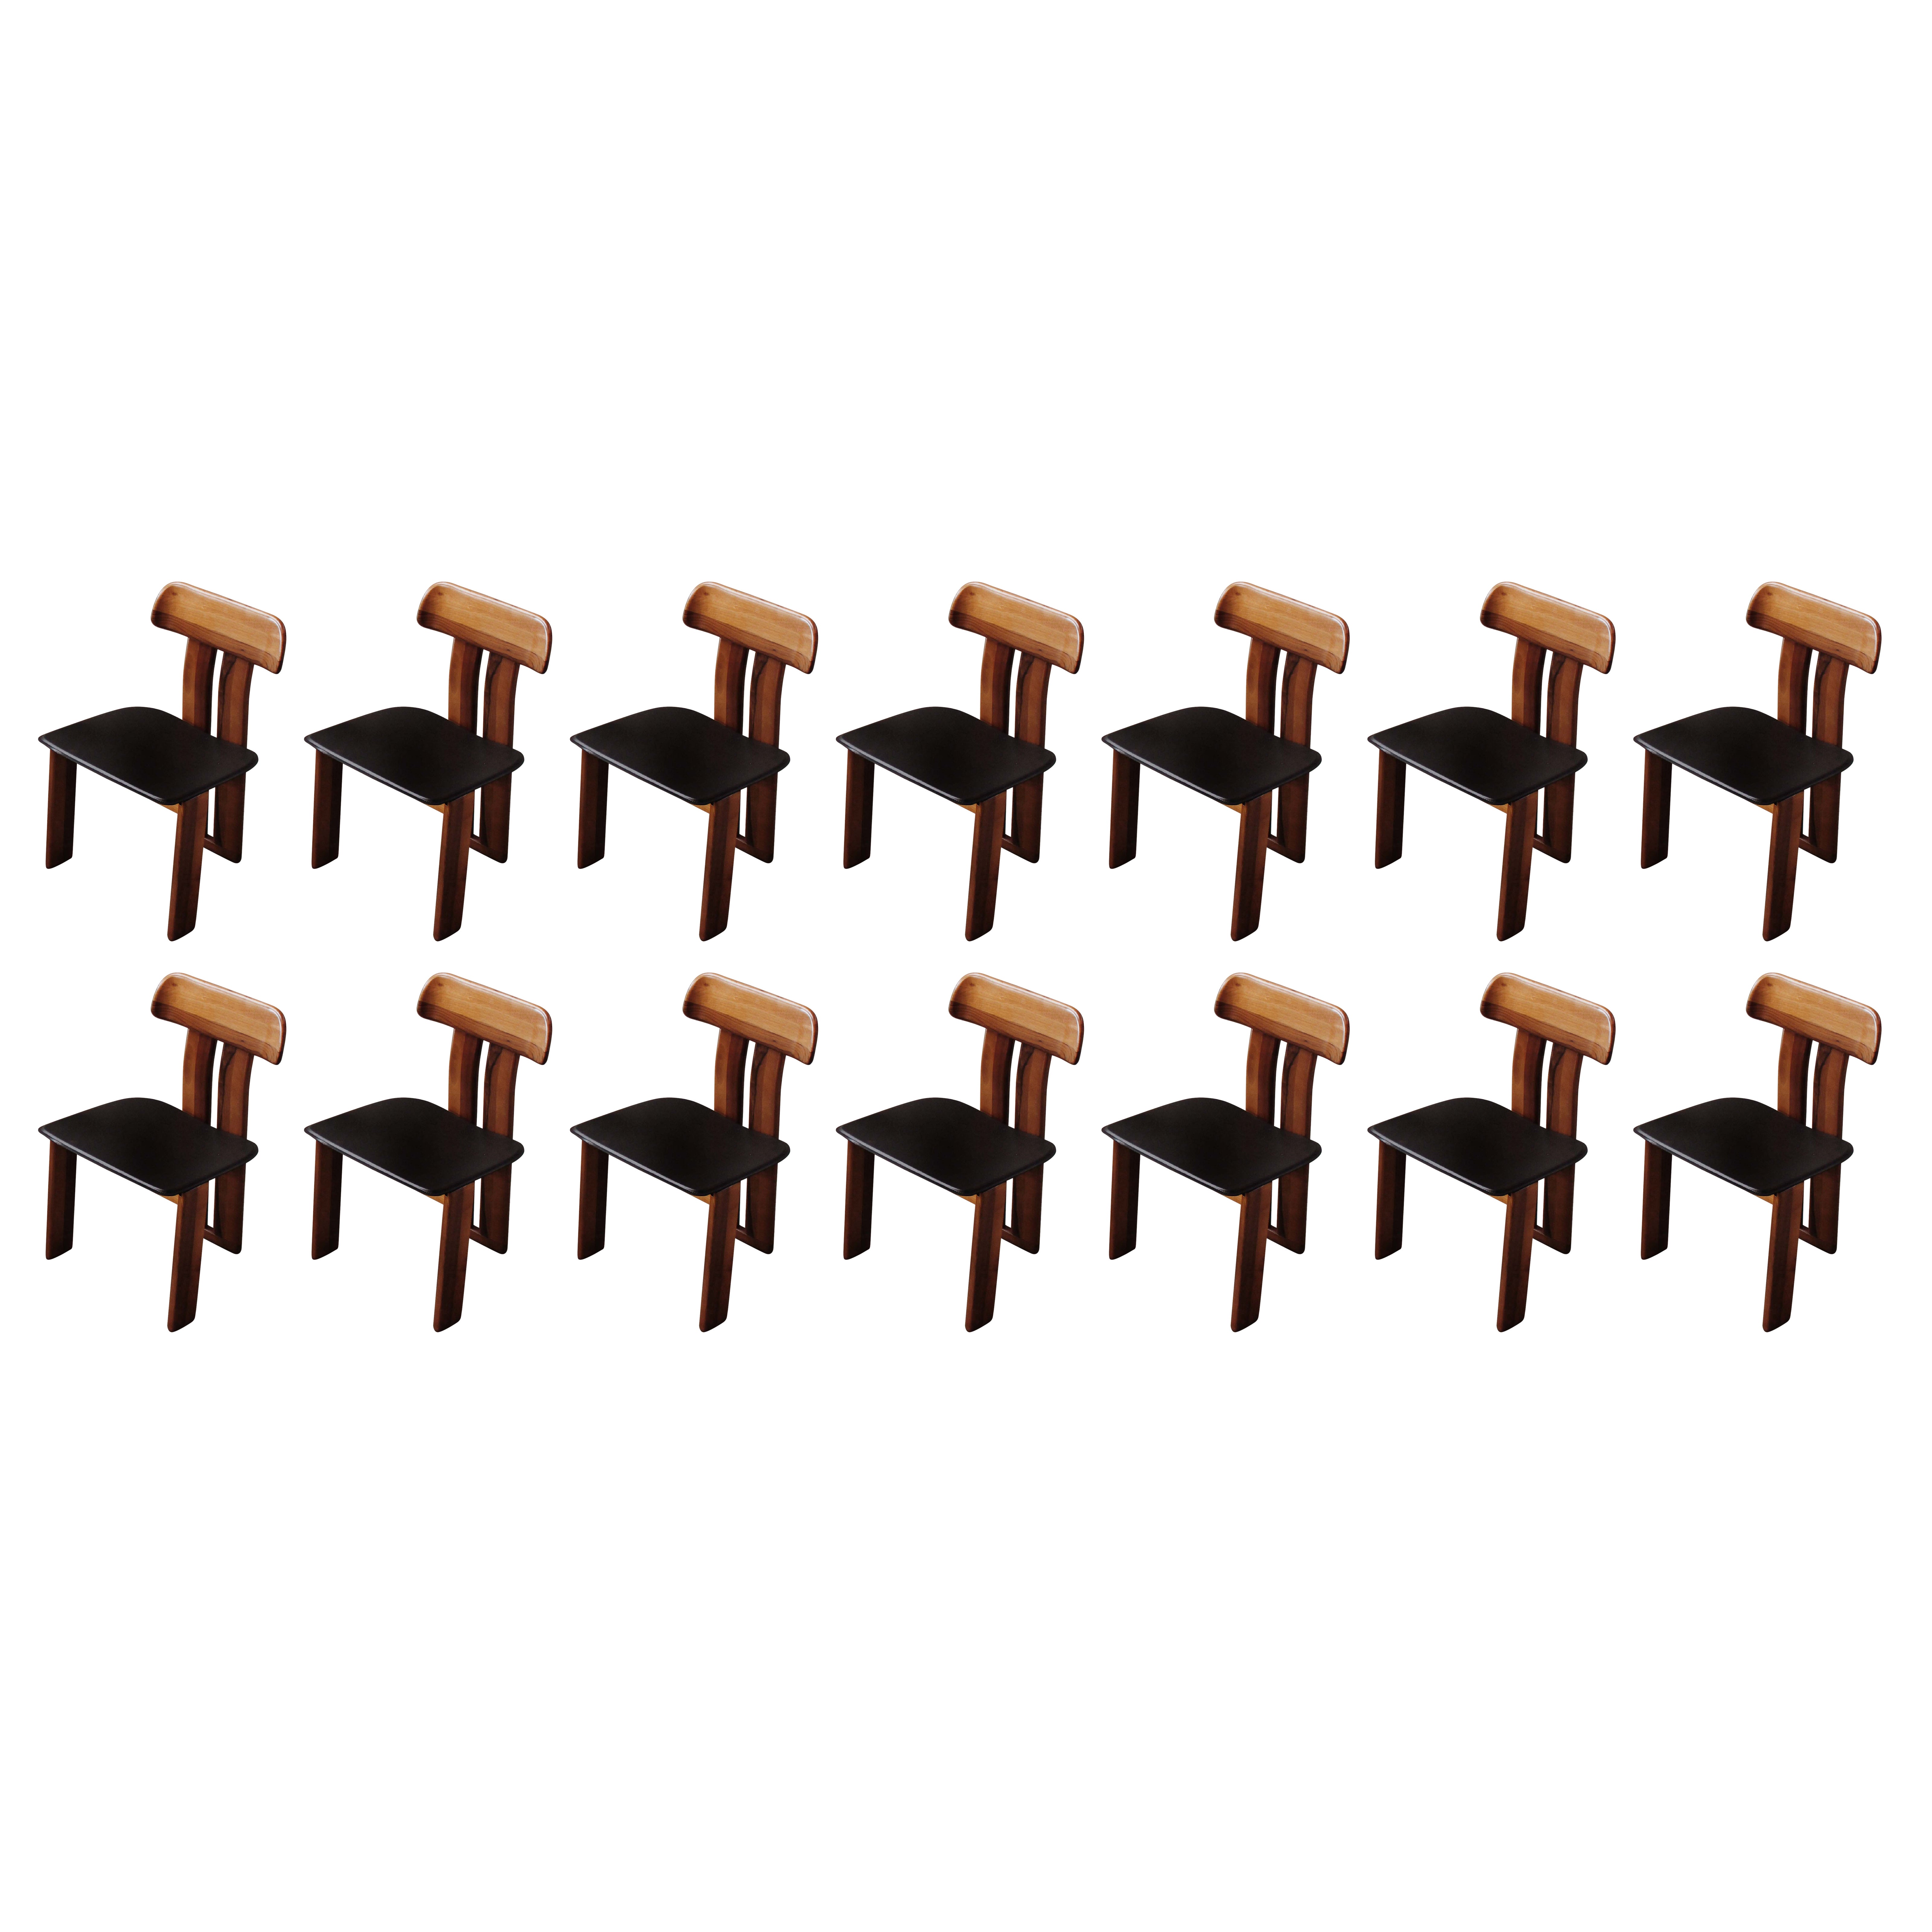 Mario Marenco "Sapporo" Chairs for Mobil Girgi, 1970, Set of 14 For Sale